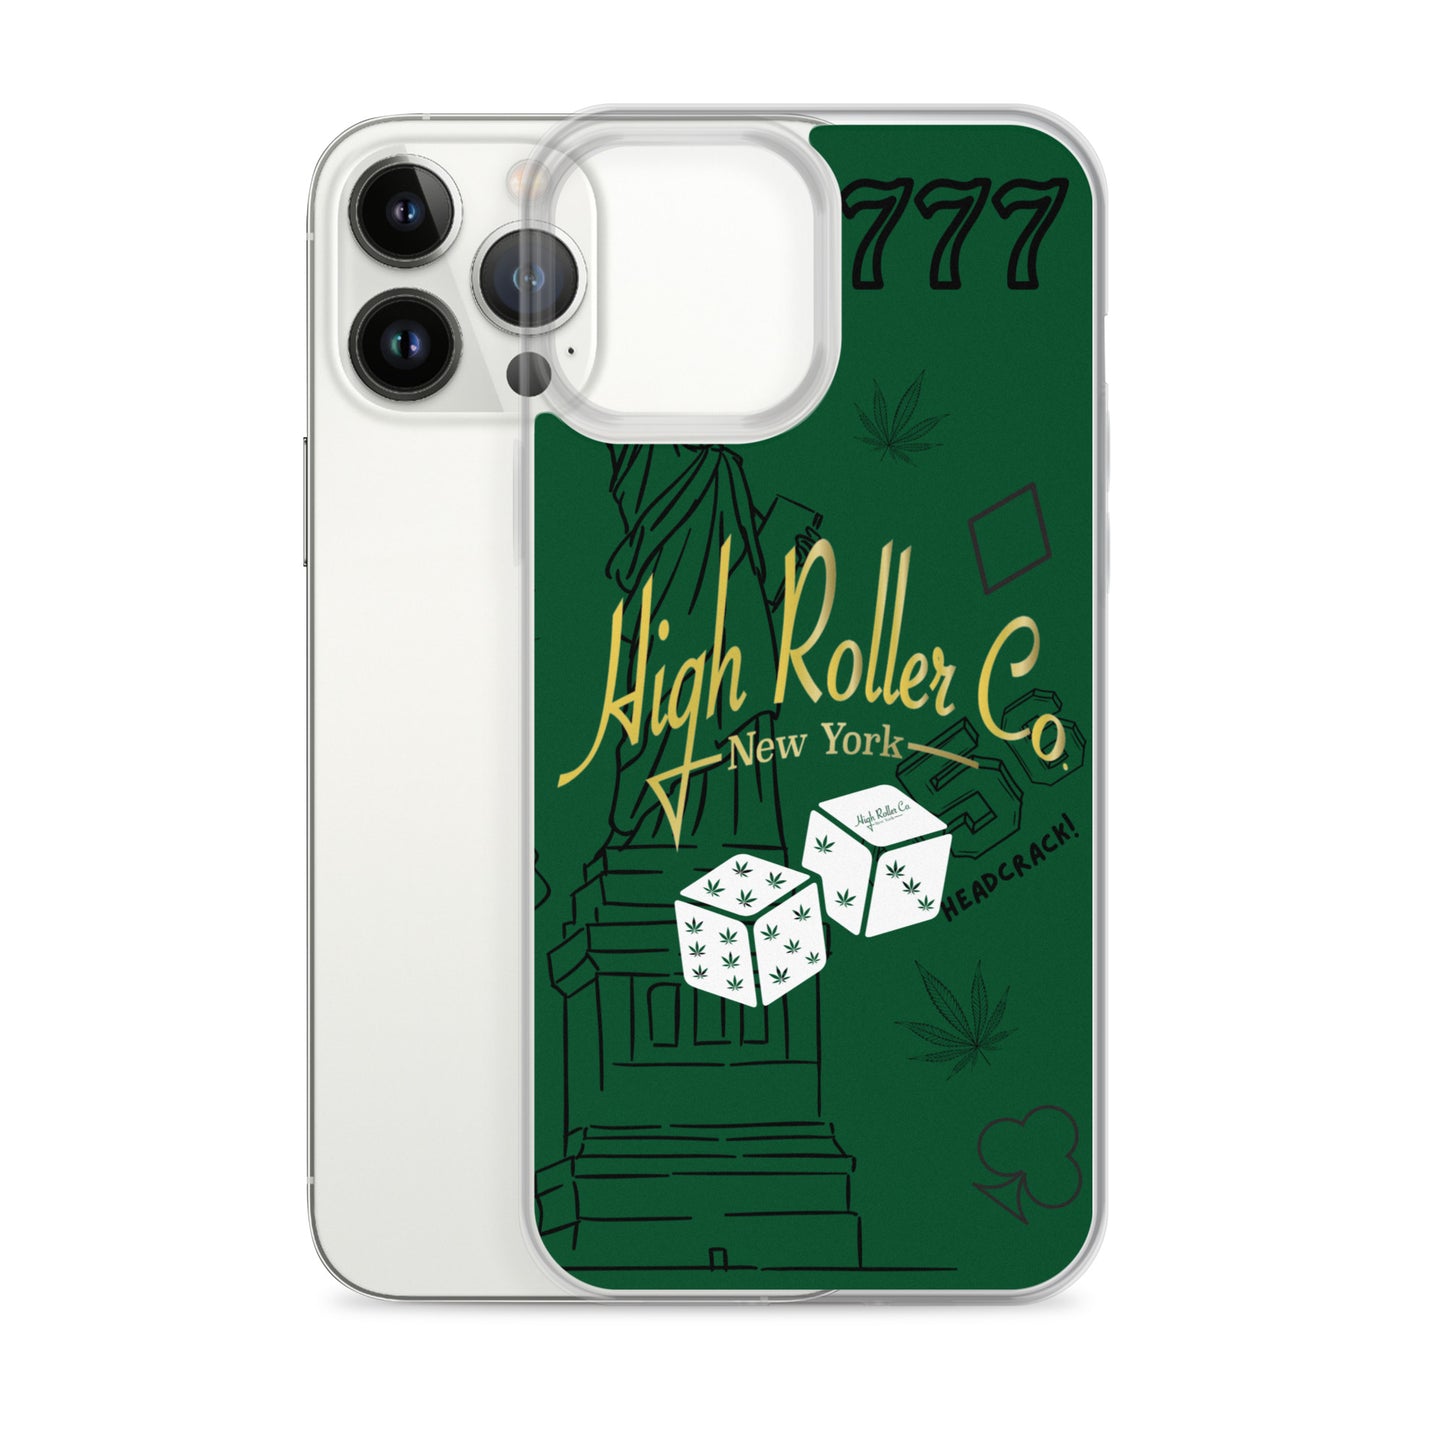 High Roller Co. iPhone Case